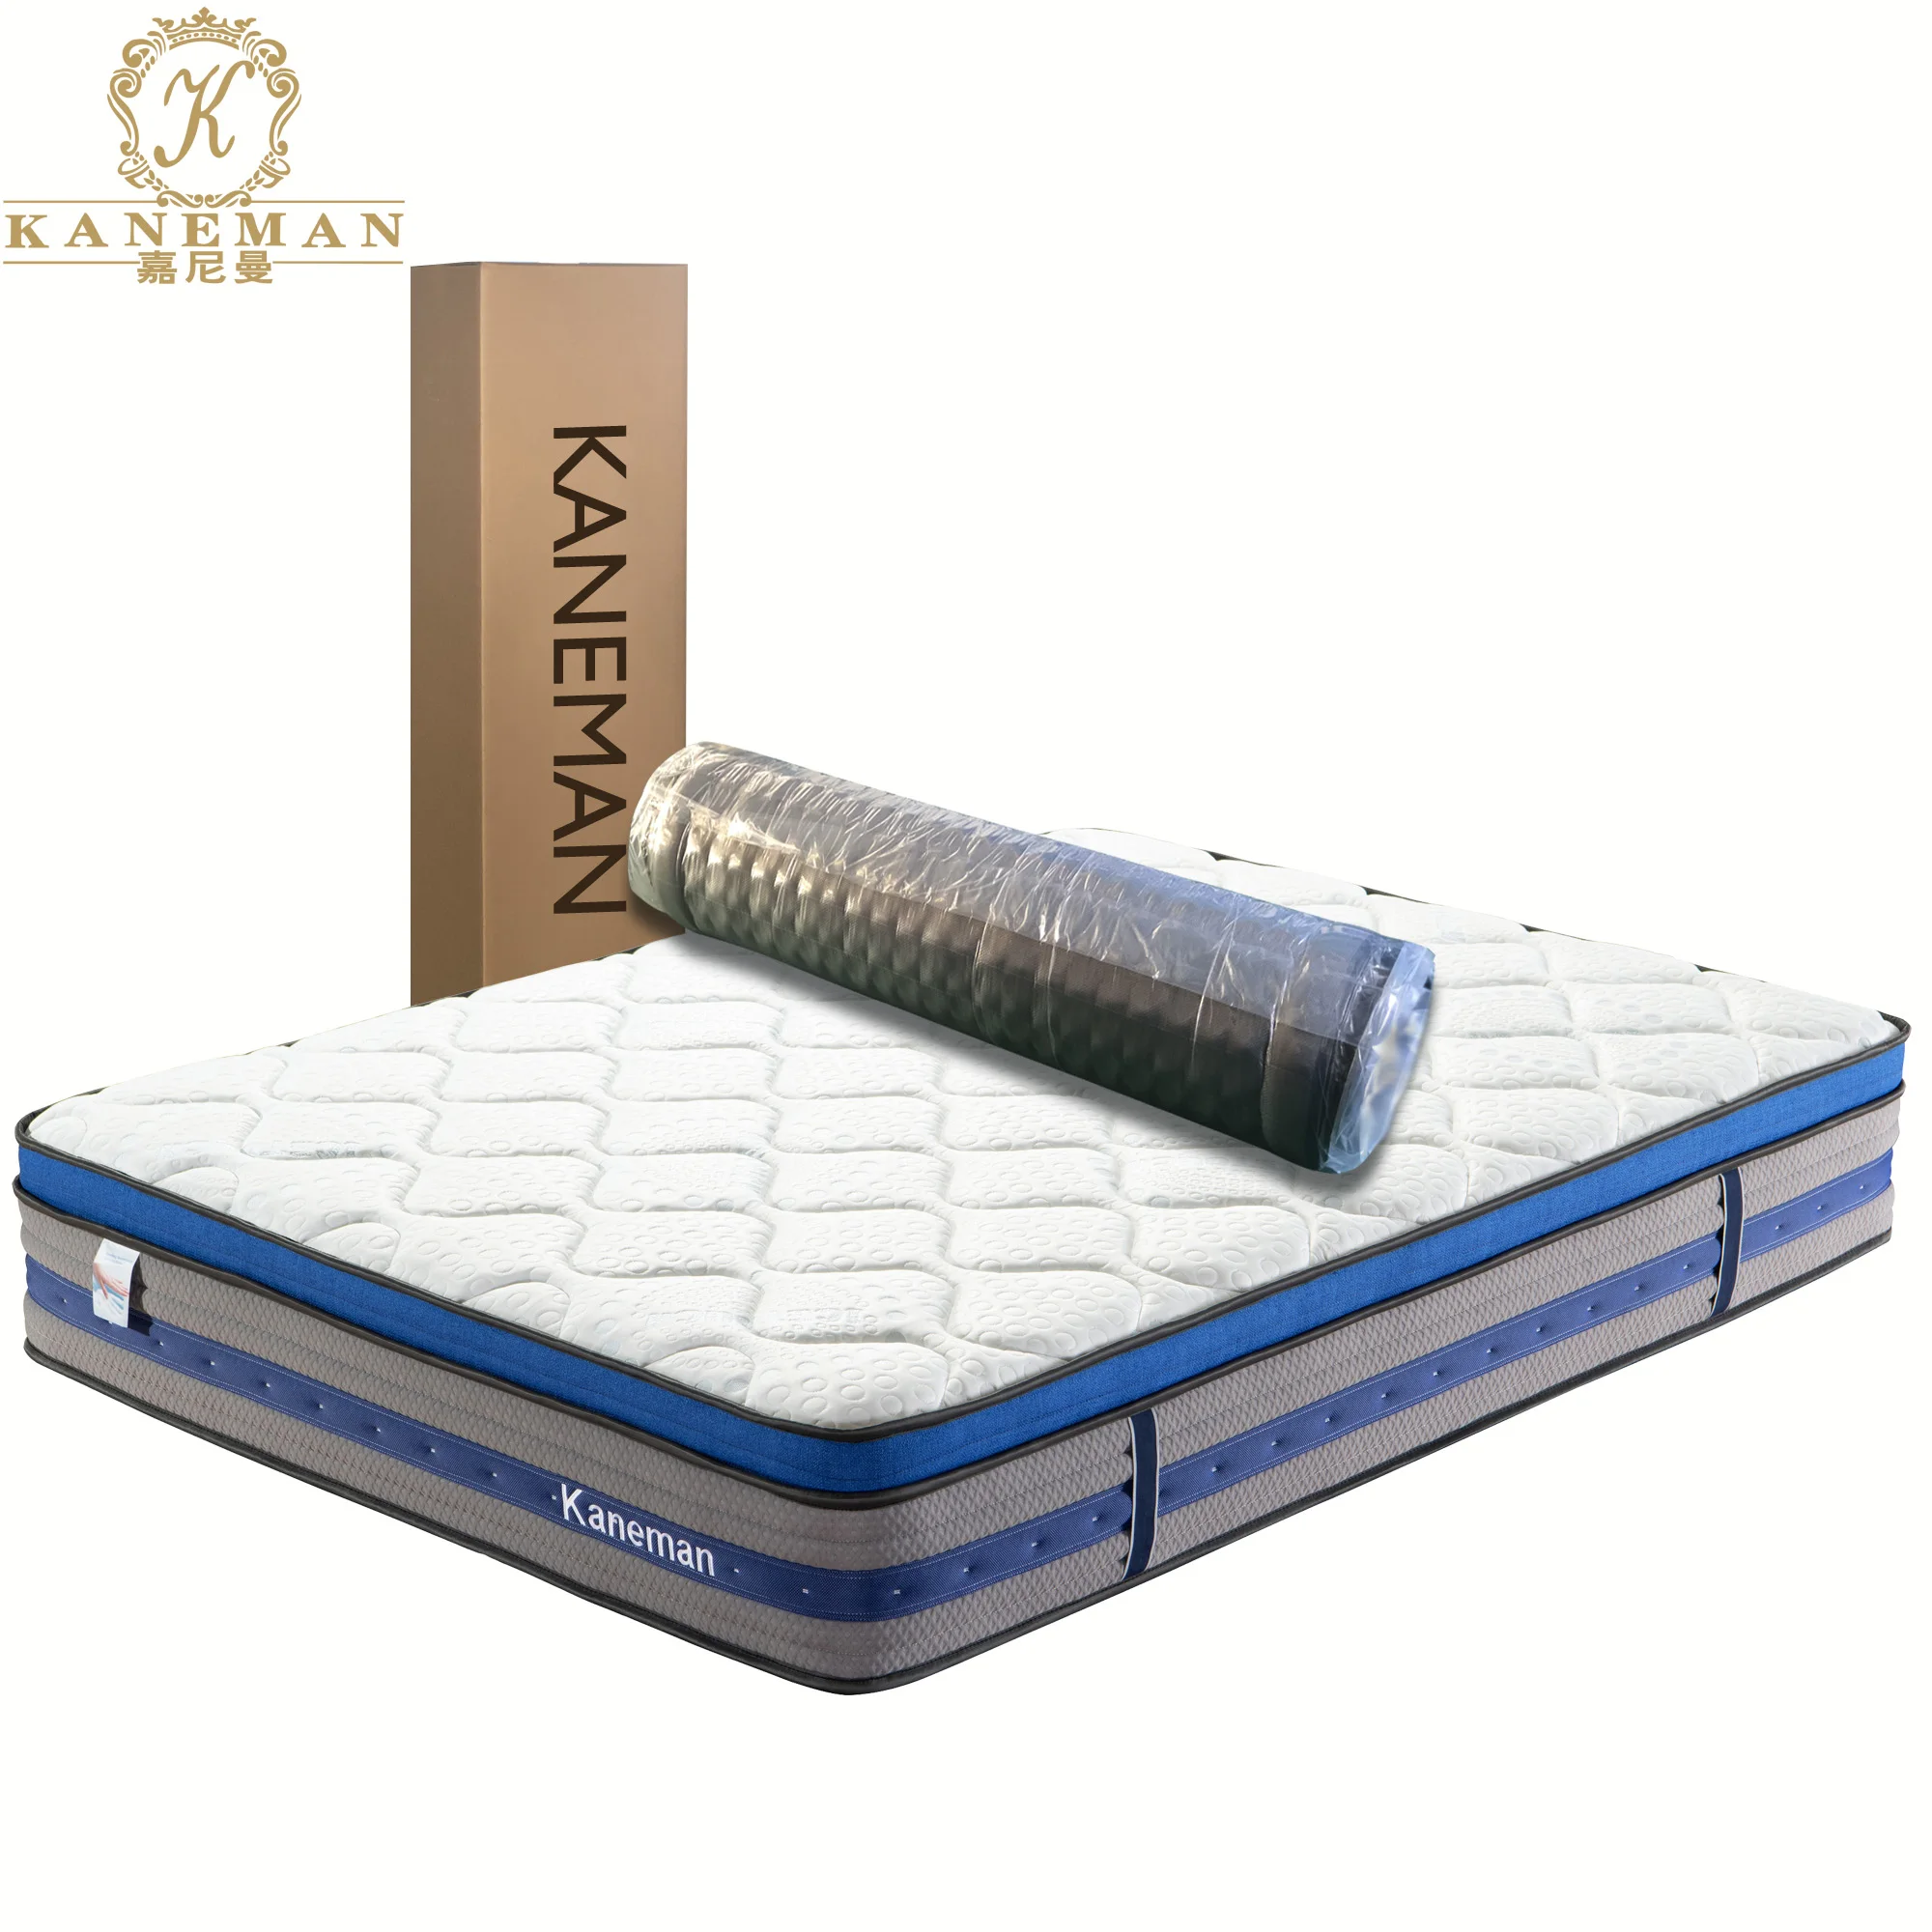 

ice cool fabric popular product on Amazon comfort cheap hotel sleep well memory foam pocket spring mattress, As the sample/your choice/any